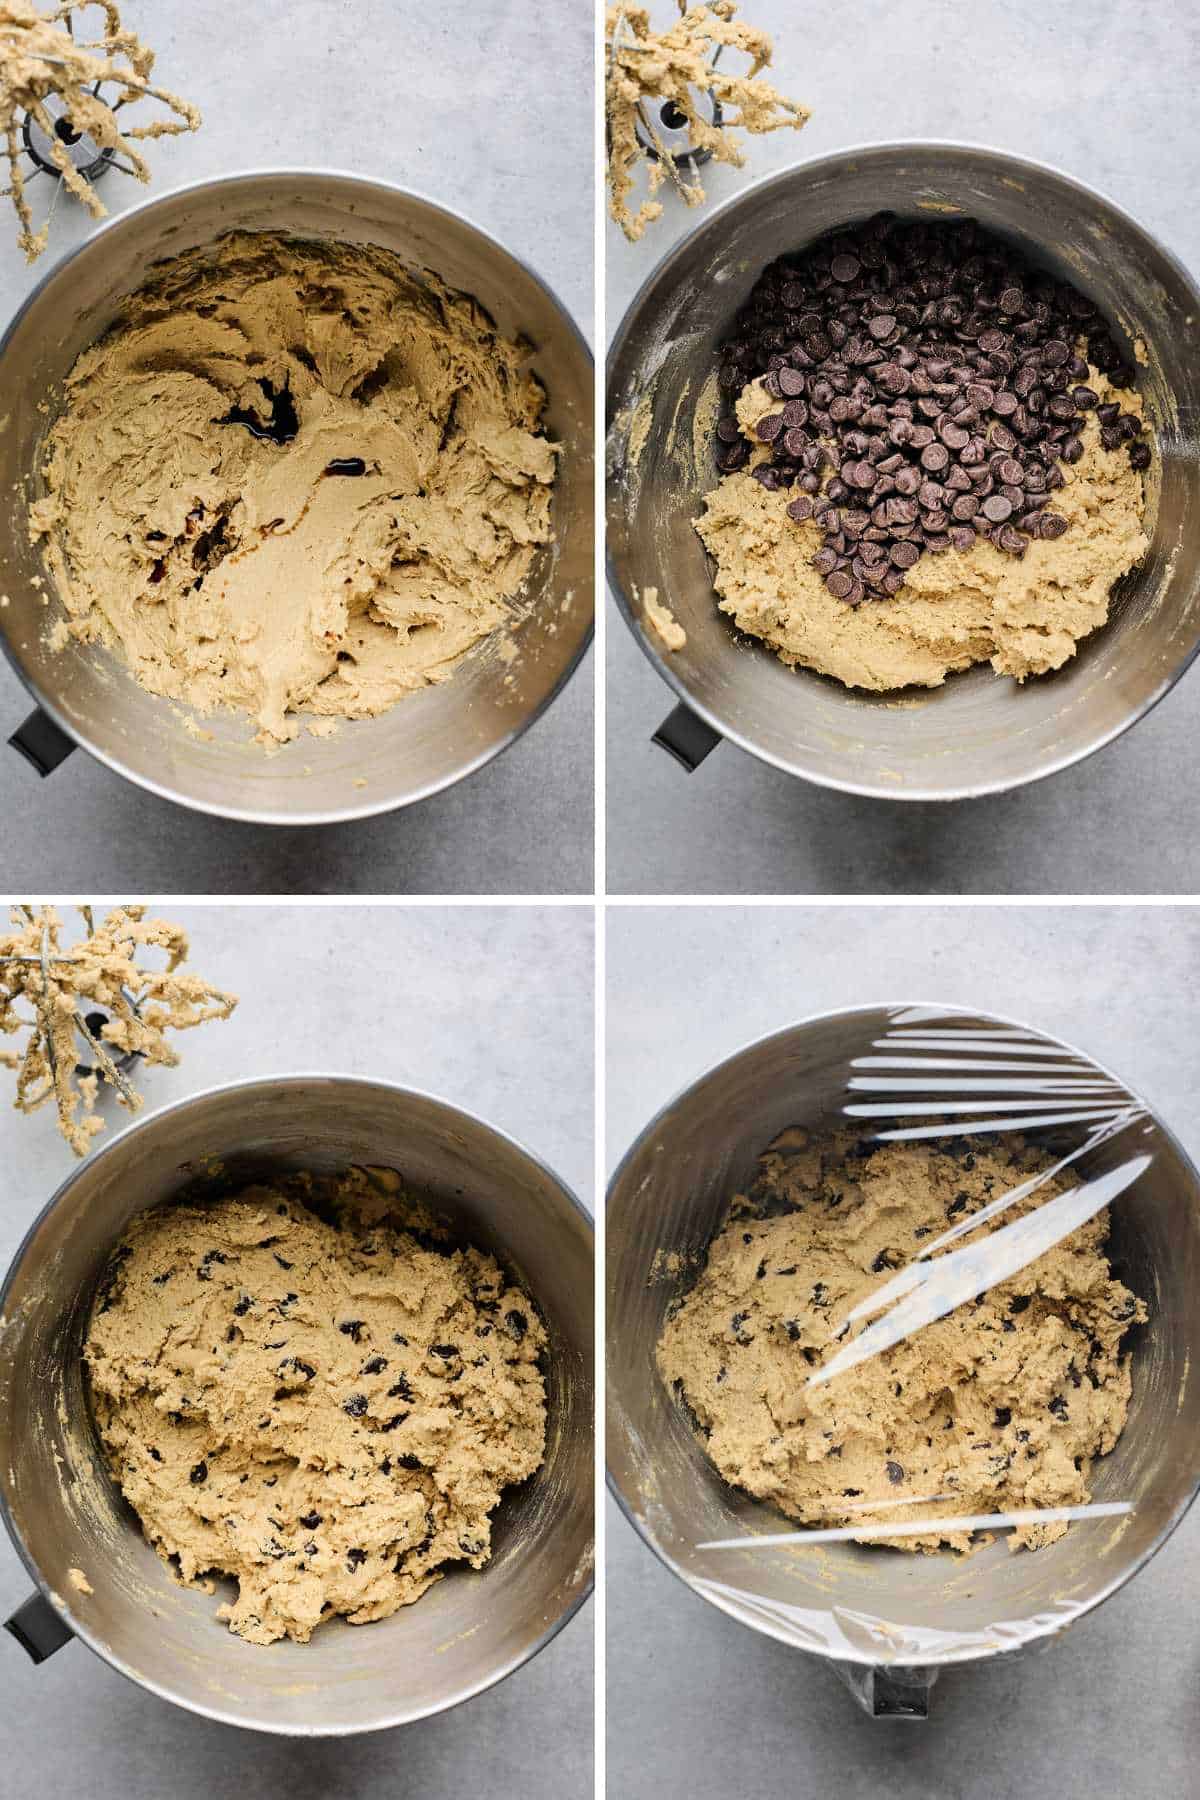 Mixing the chocolate chip cookie dough and adding the chips before covering it with plastic to chill.